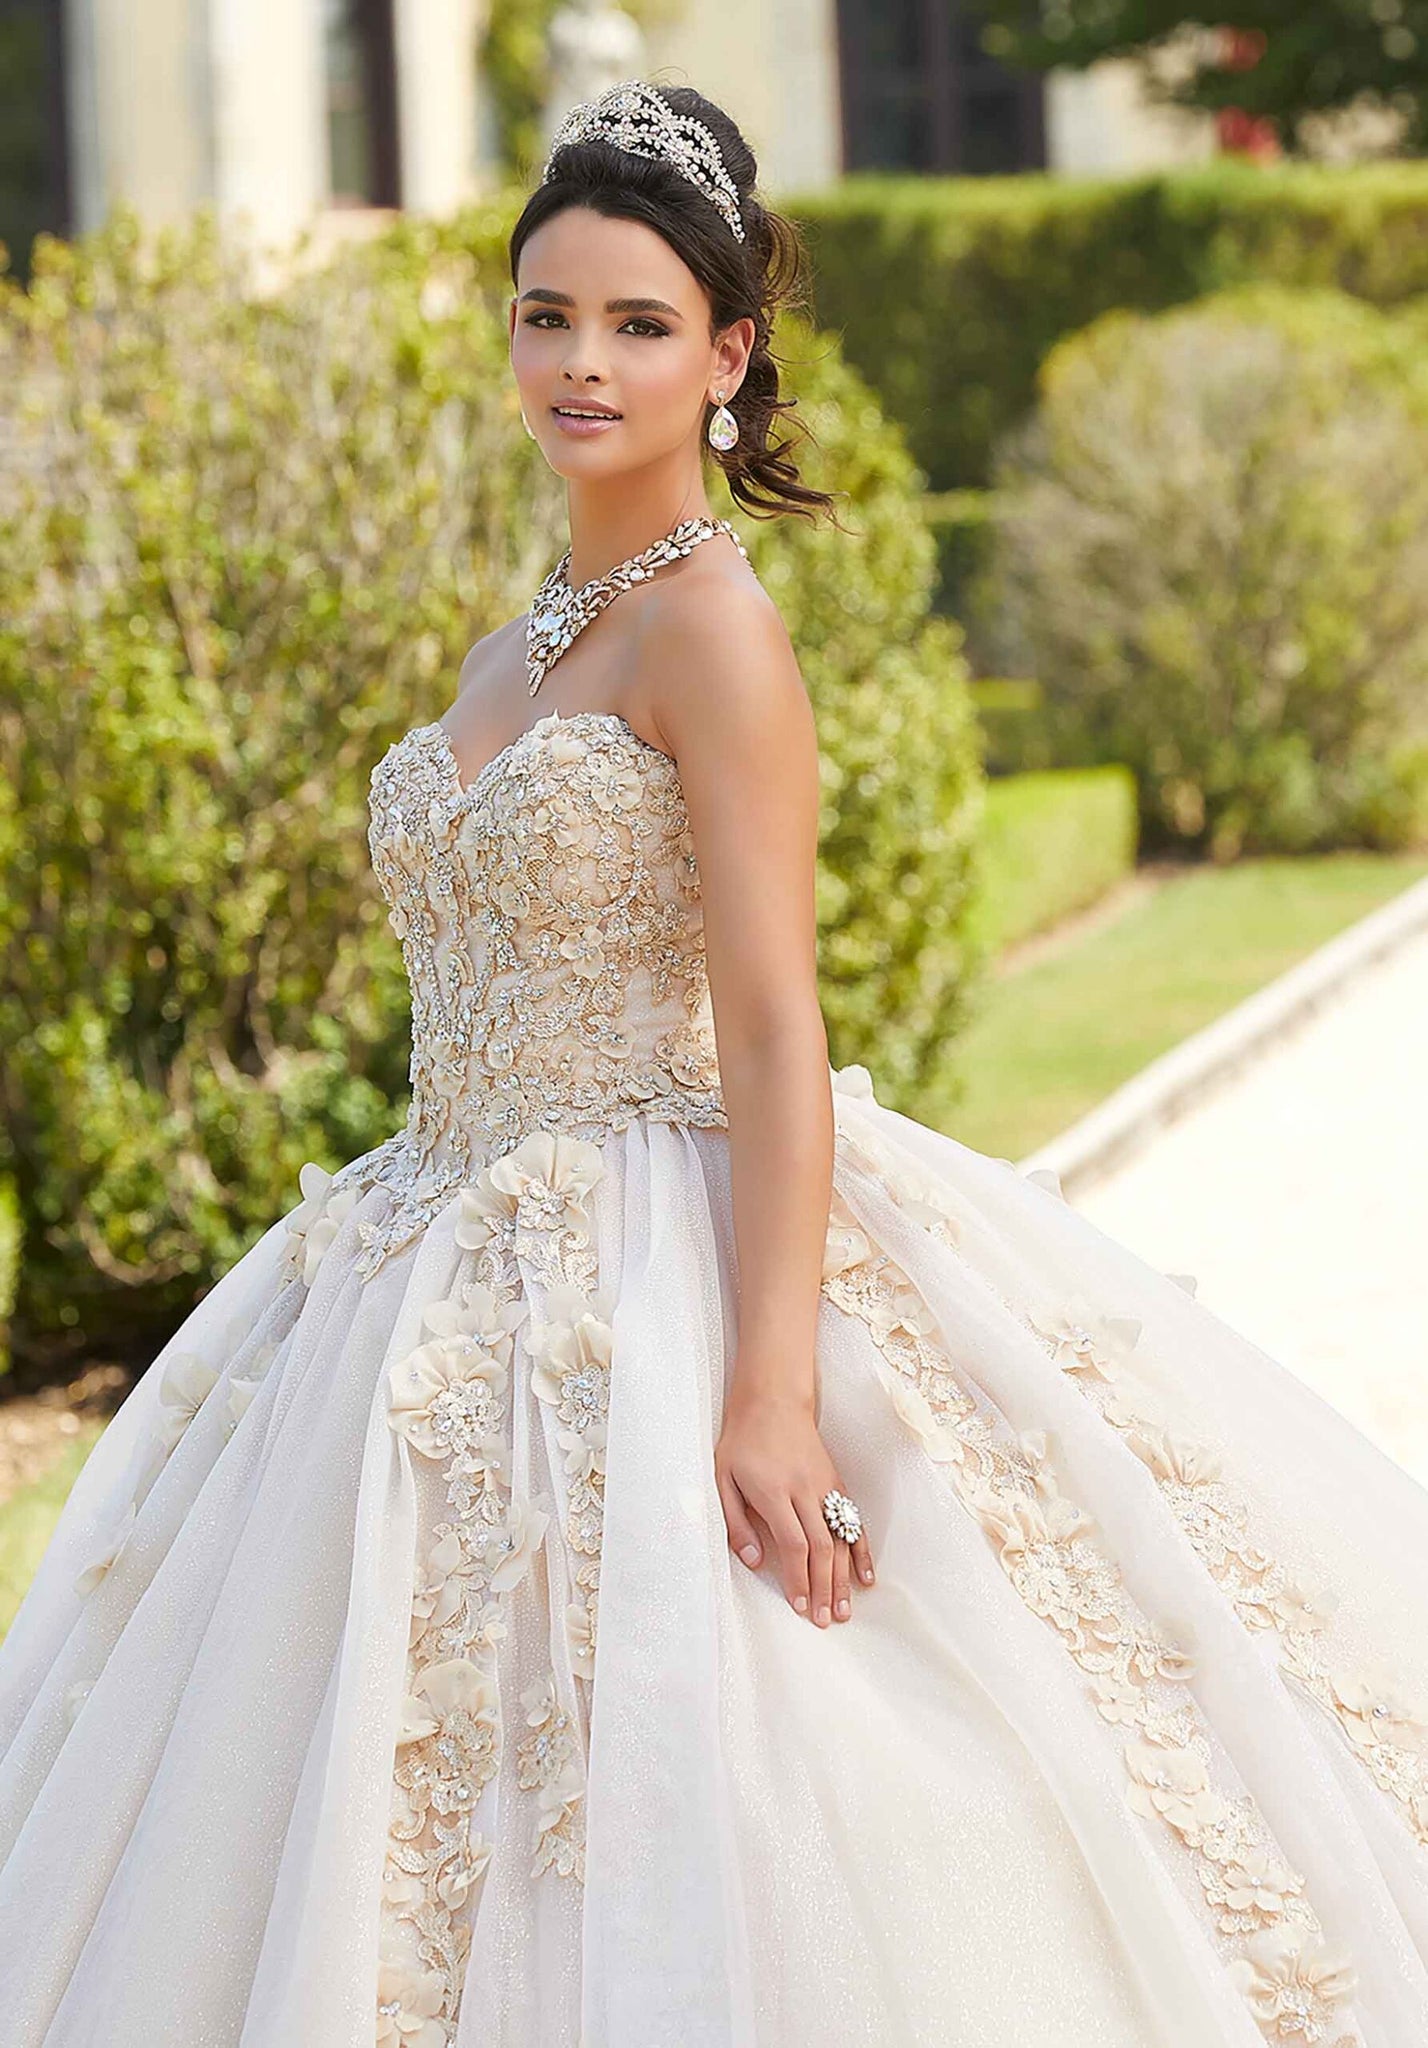 Three-Dimensional Floral Embroidered Quinceañera Dress